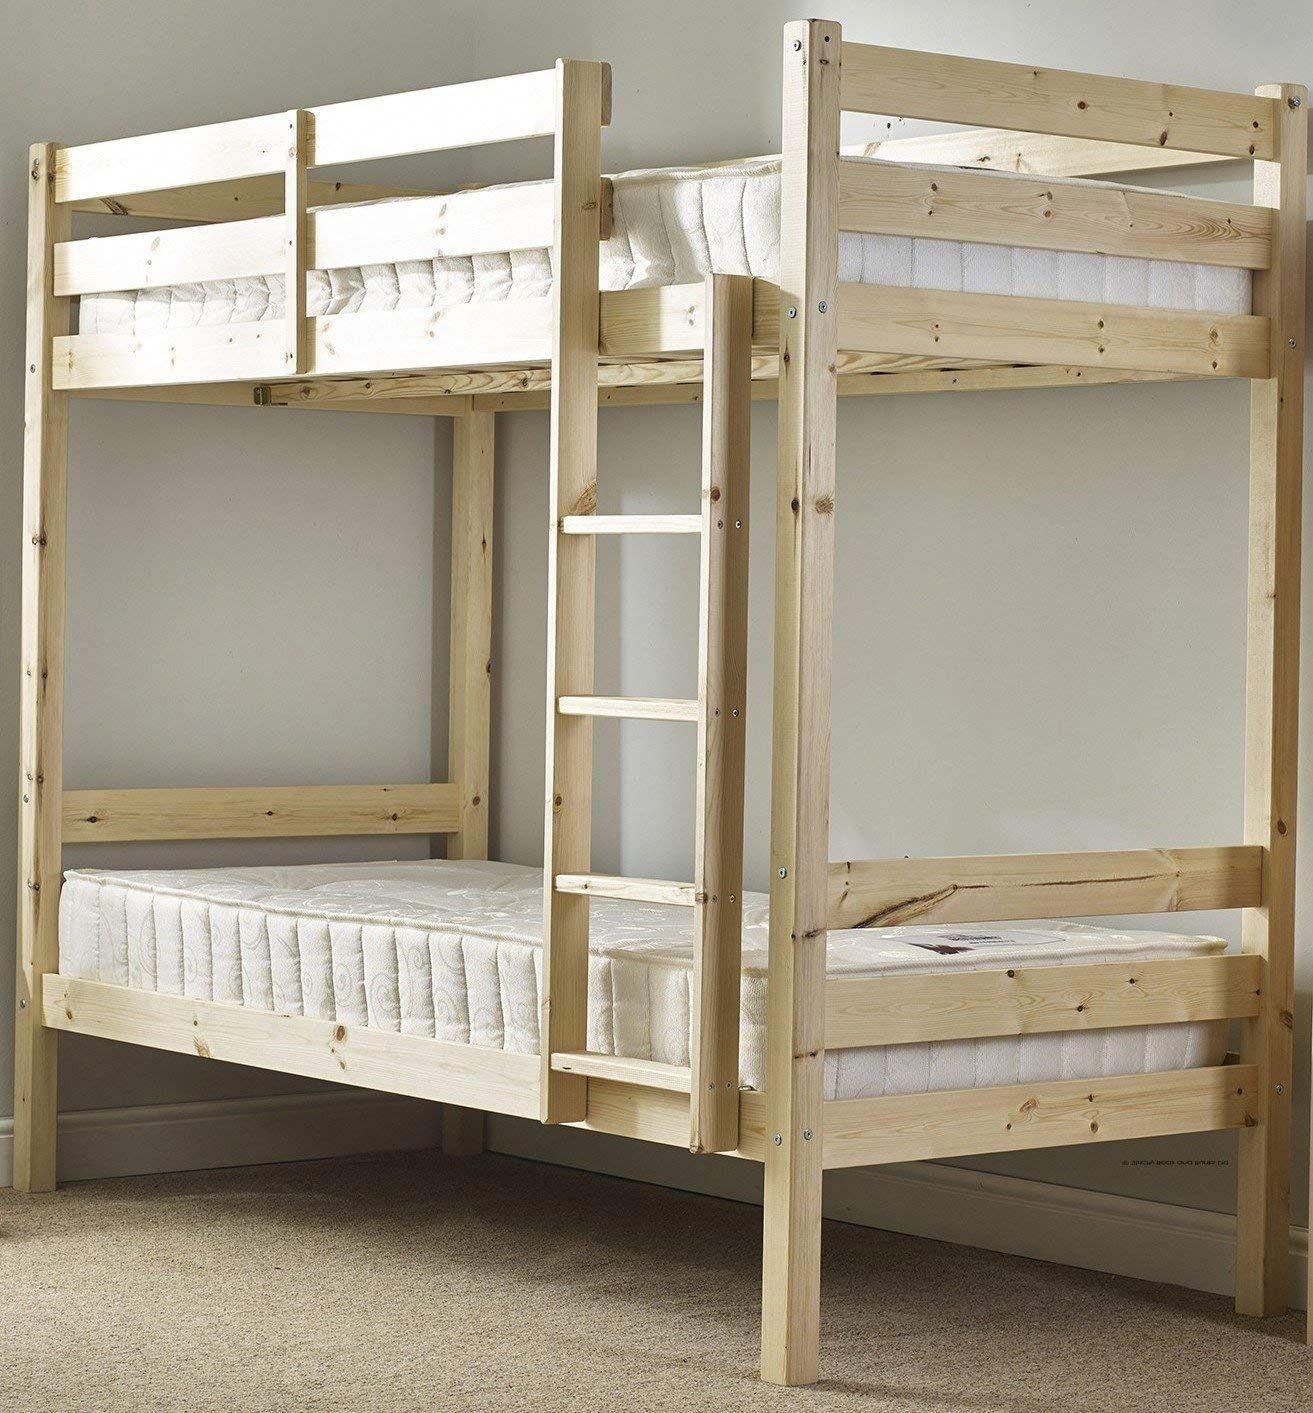 Heavy Duty Bunk Beds Visualhunt, Heavy Duty Bunk Bed Frame White And Pineapple